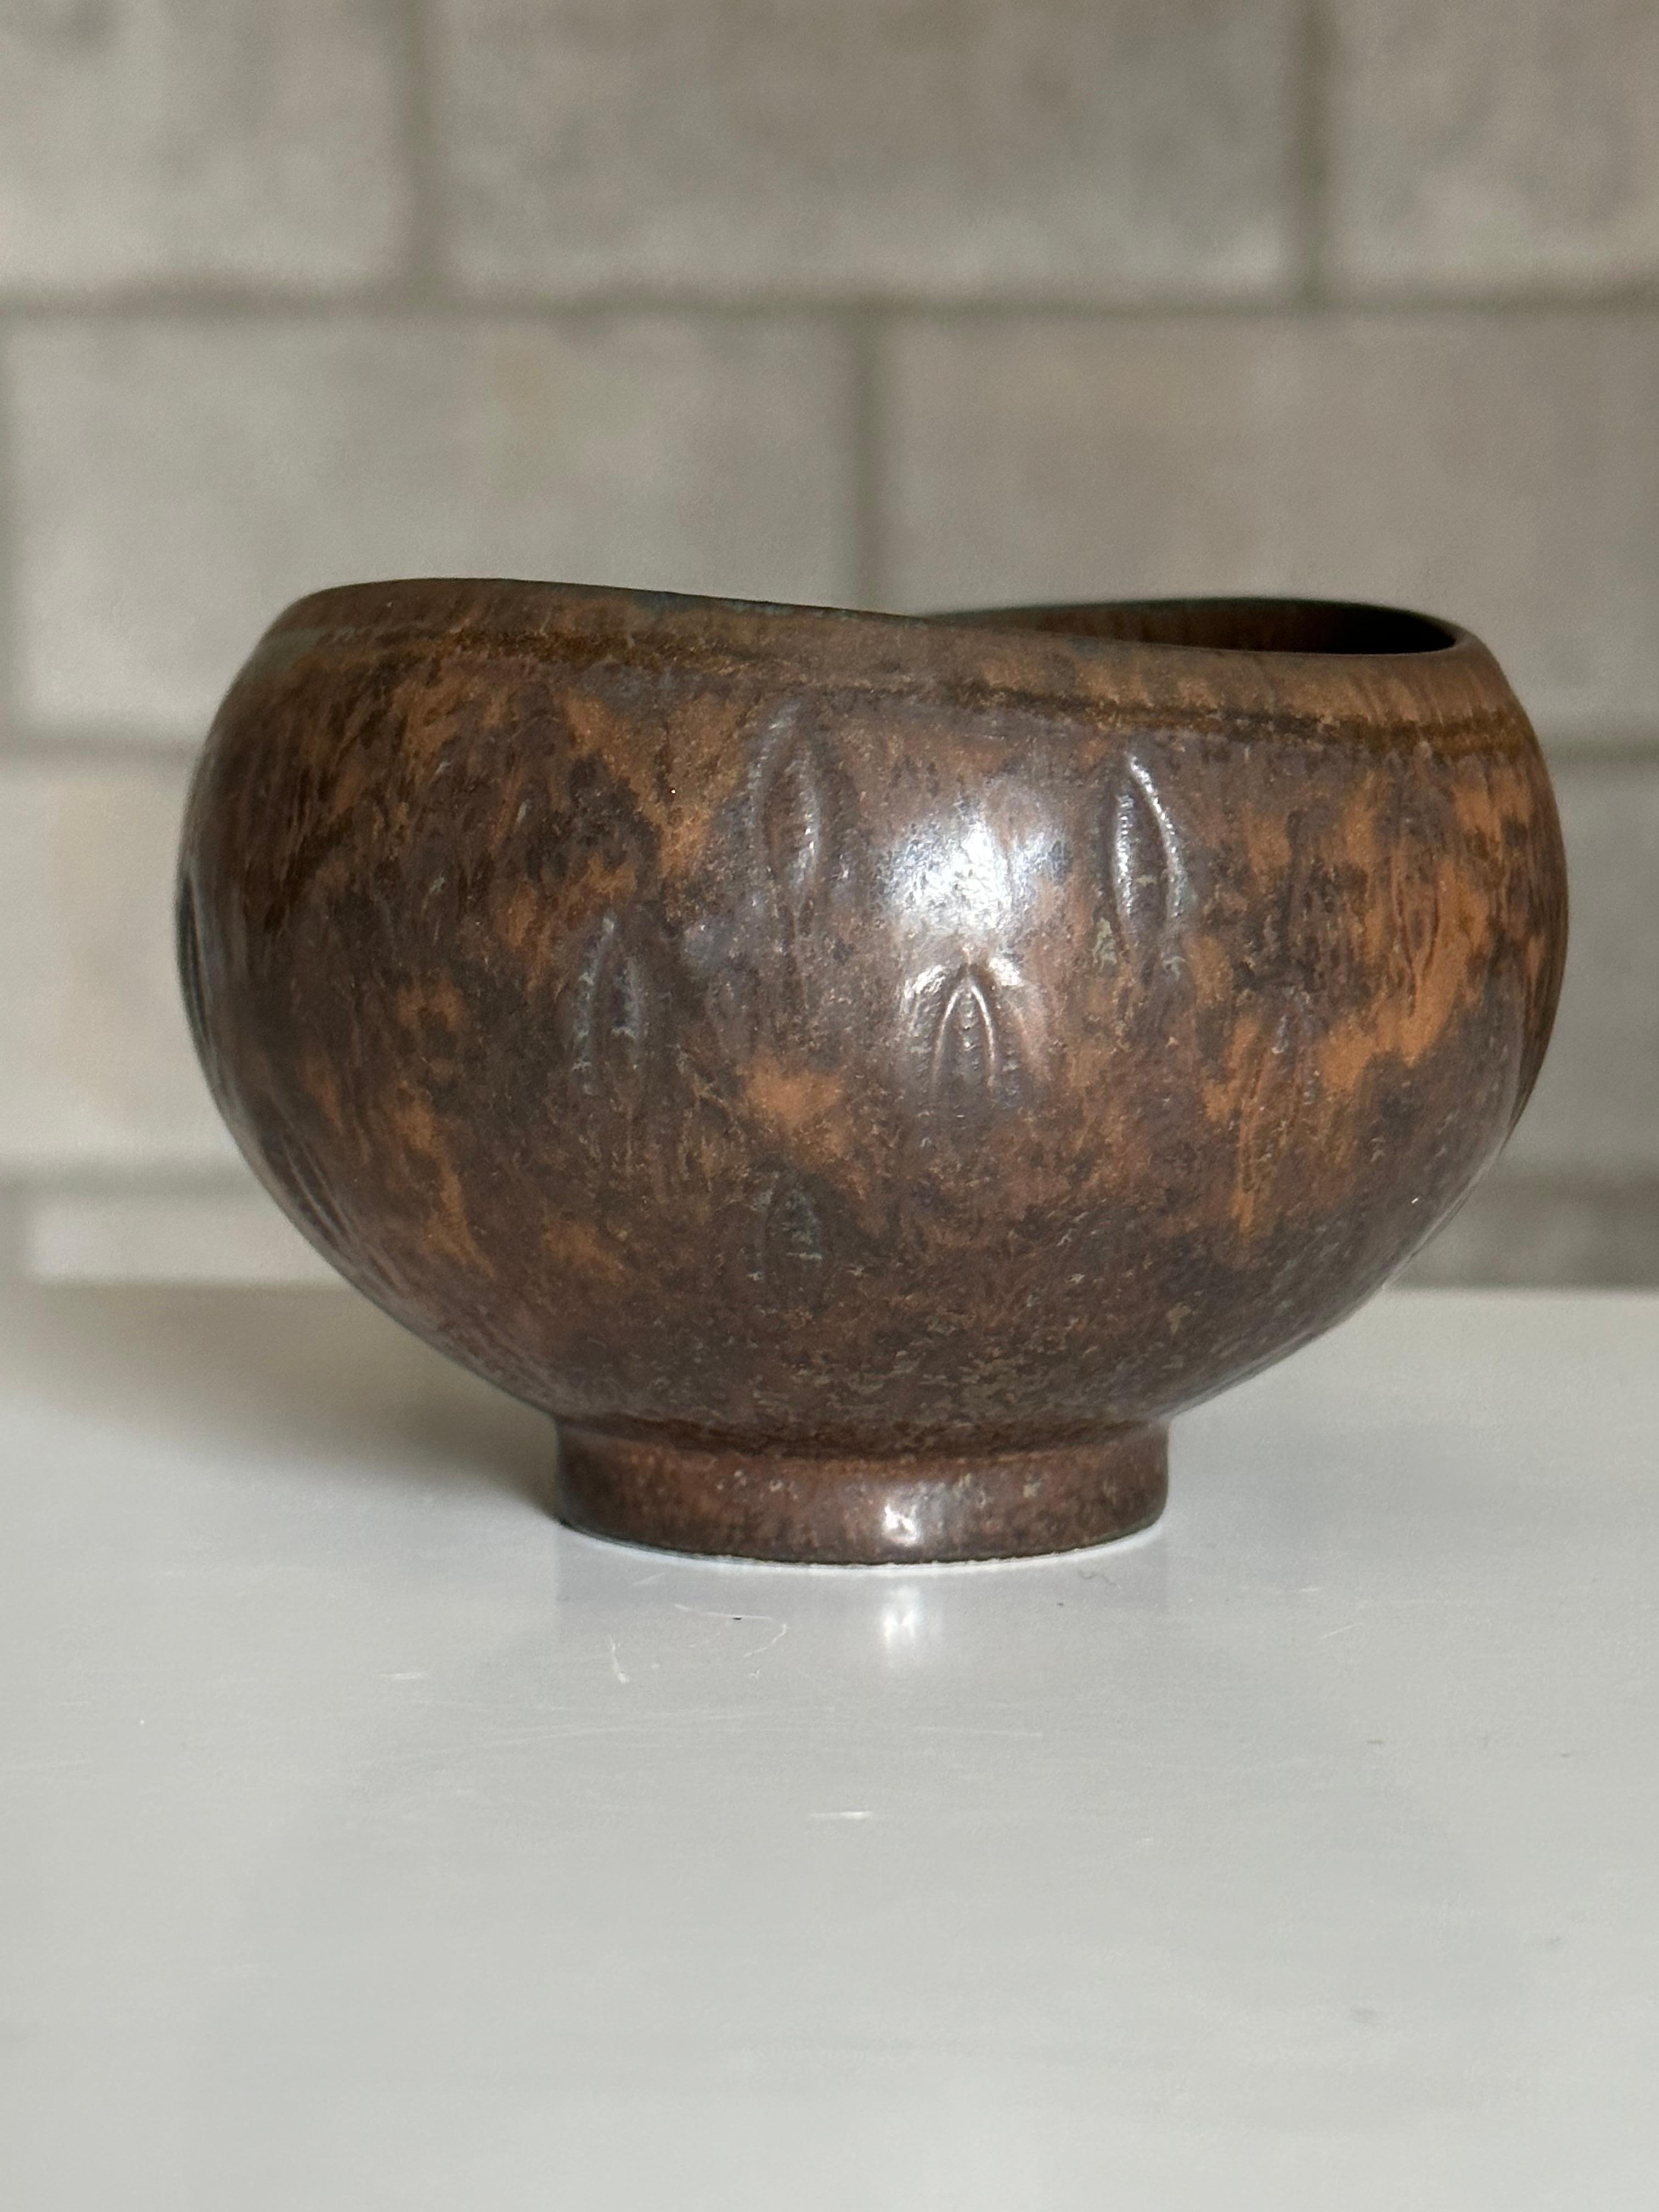 Wonderful small bowl designed by Gunnar Nylund for Rörstrand. Features a unique rust brown or terra-cotta bowl. Unusual patterning around exterior of bowl with an almost repeating leaf like motif. 
